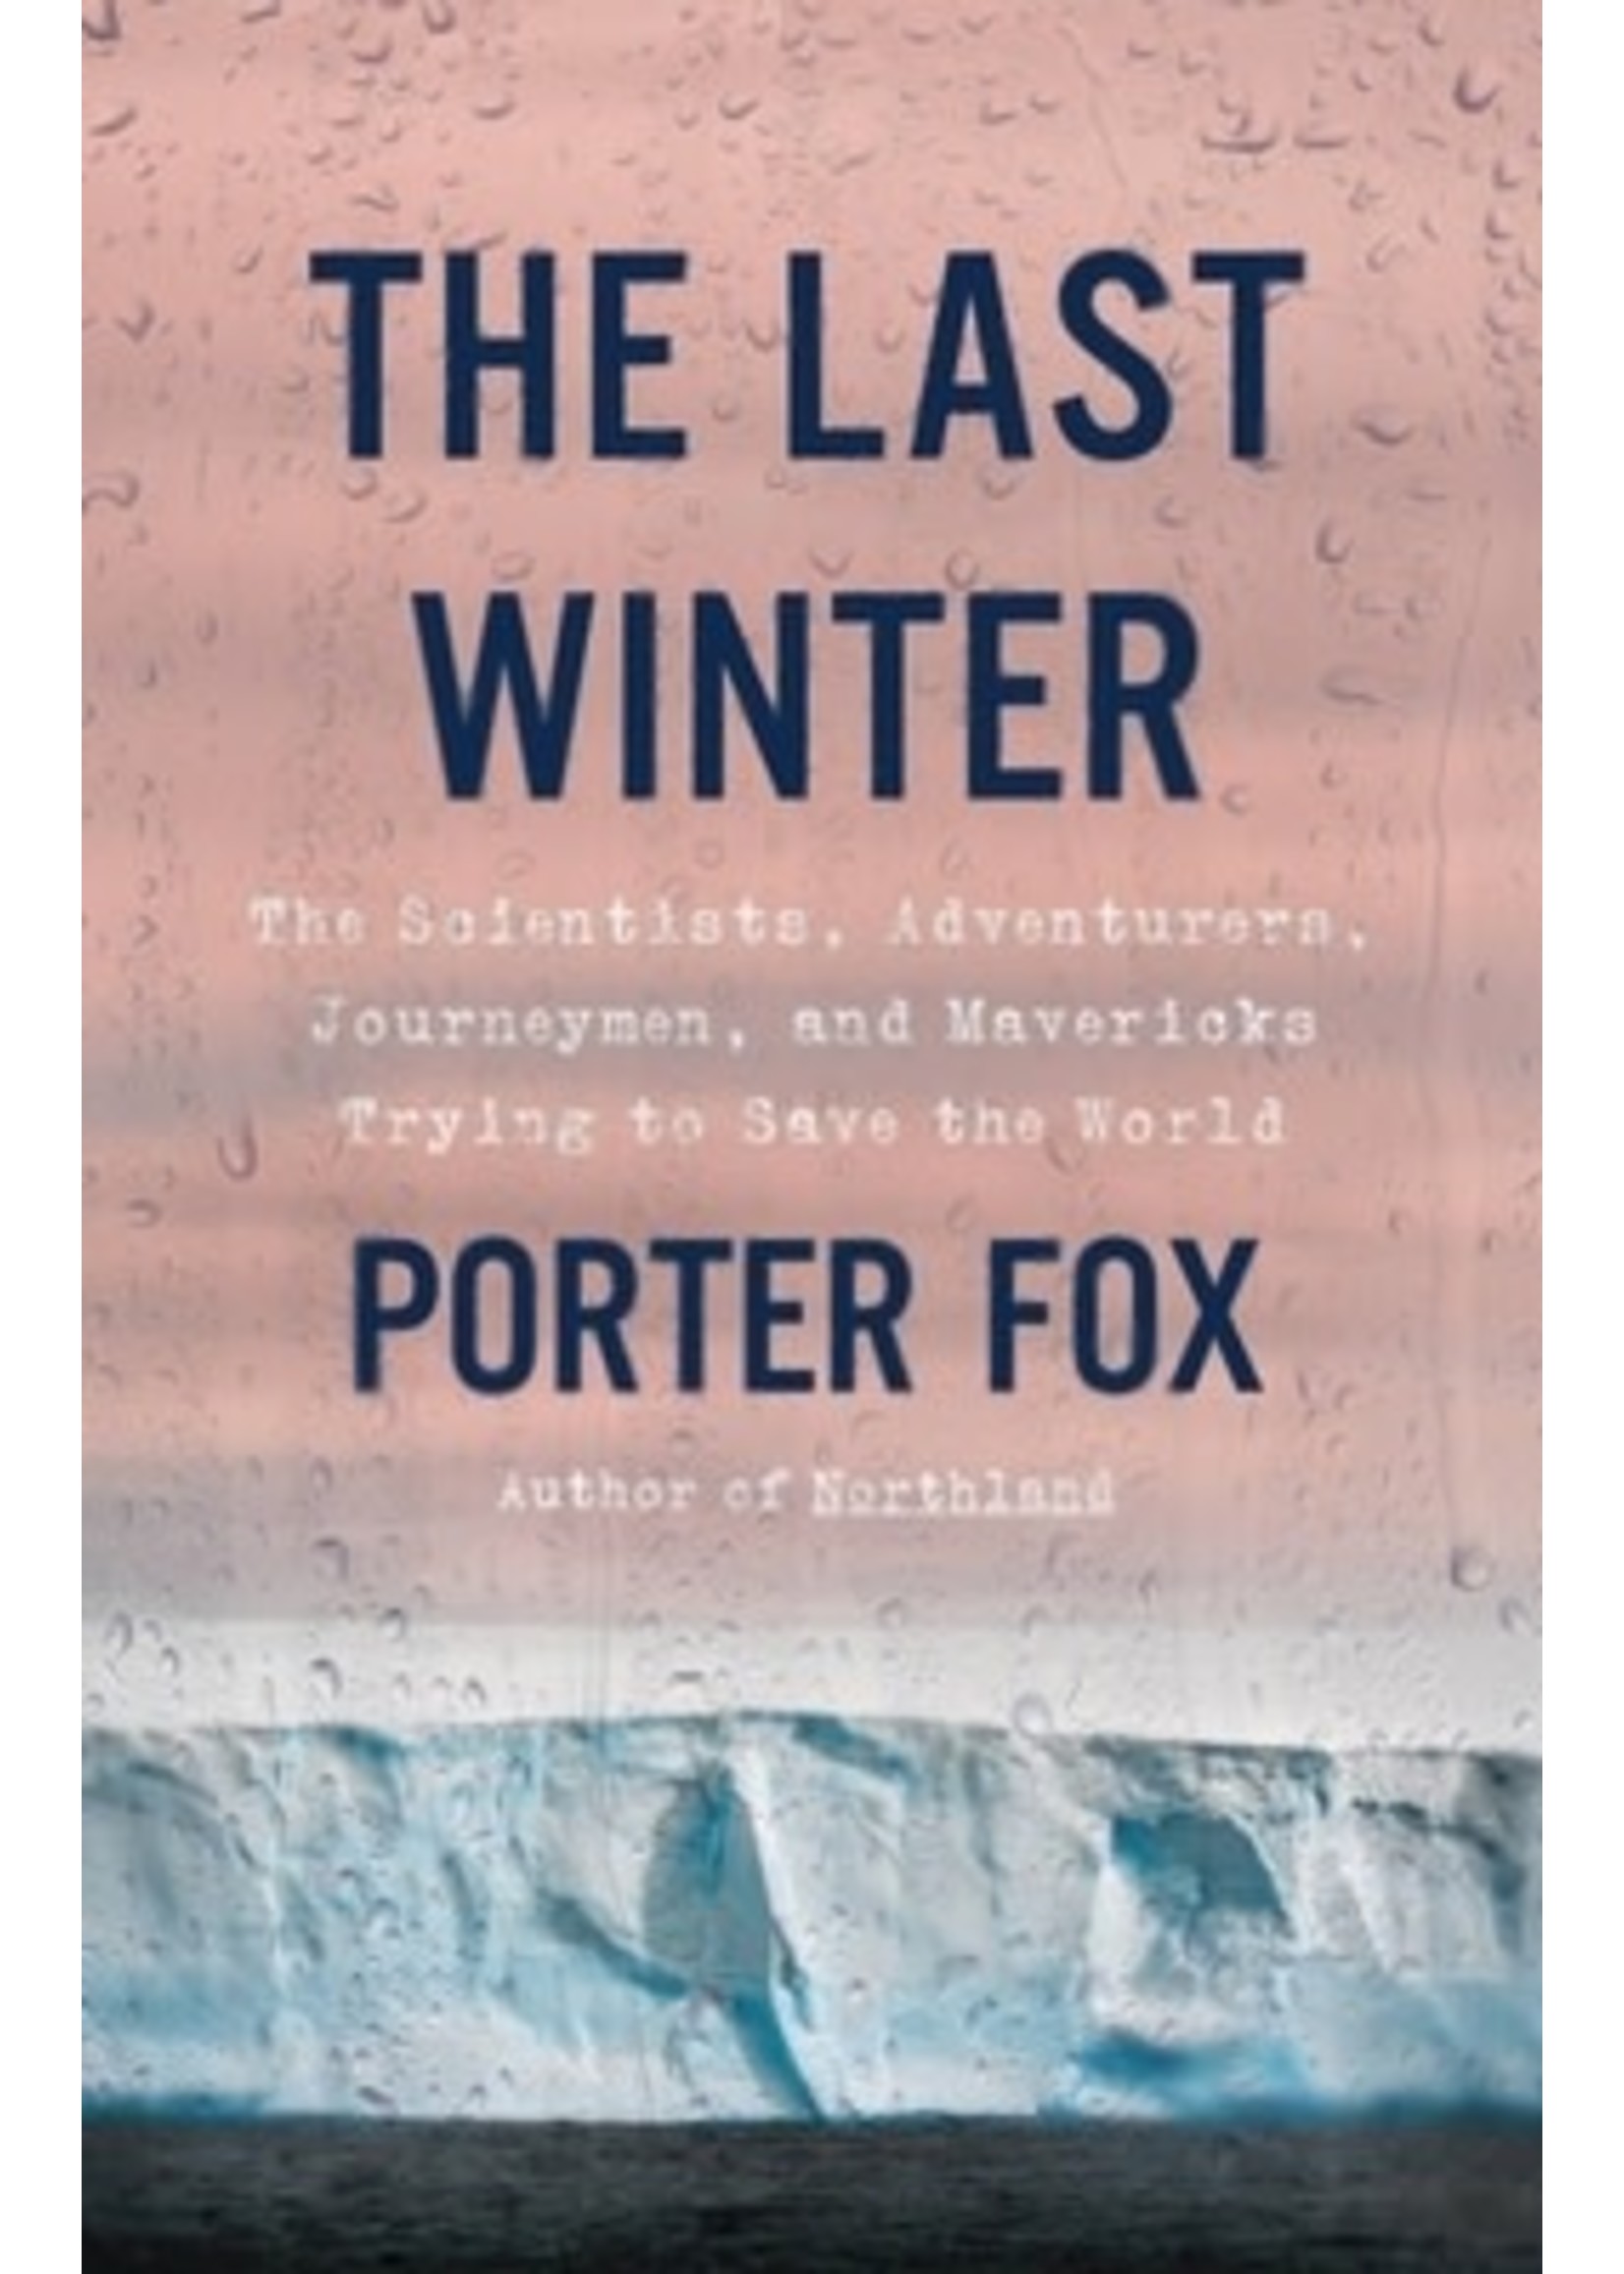 The Last Winter: The Scientists, Adventurers, Journeymen, and Mavericks Trying to Save the World by Porter Fox